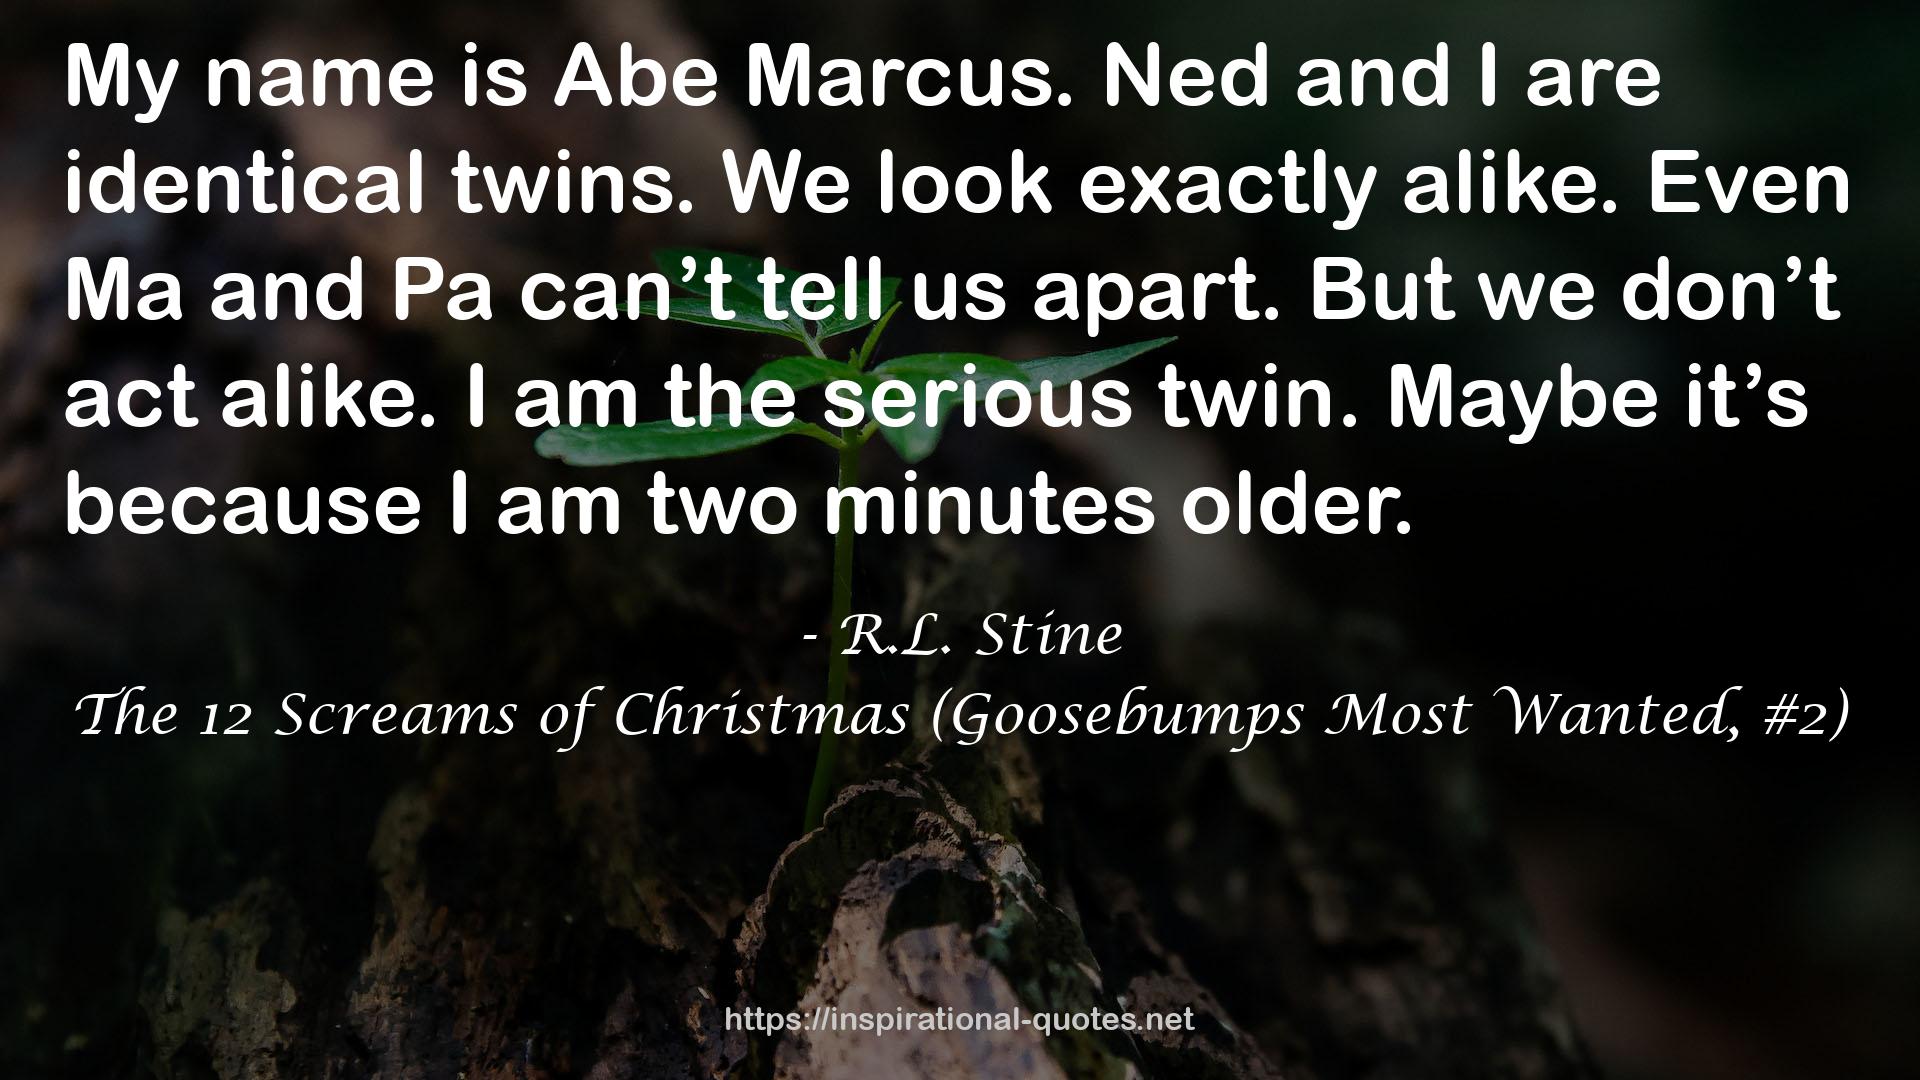 The 12 Screams of Christmas (Goosebumps Most Wanted, #2) QUOTES